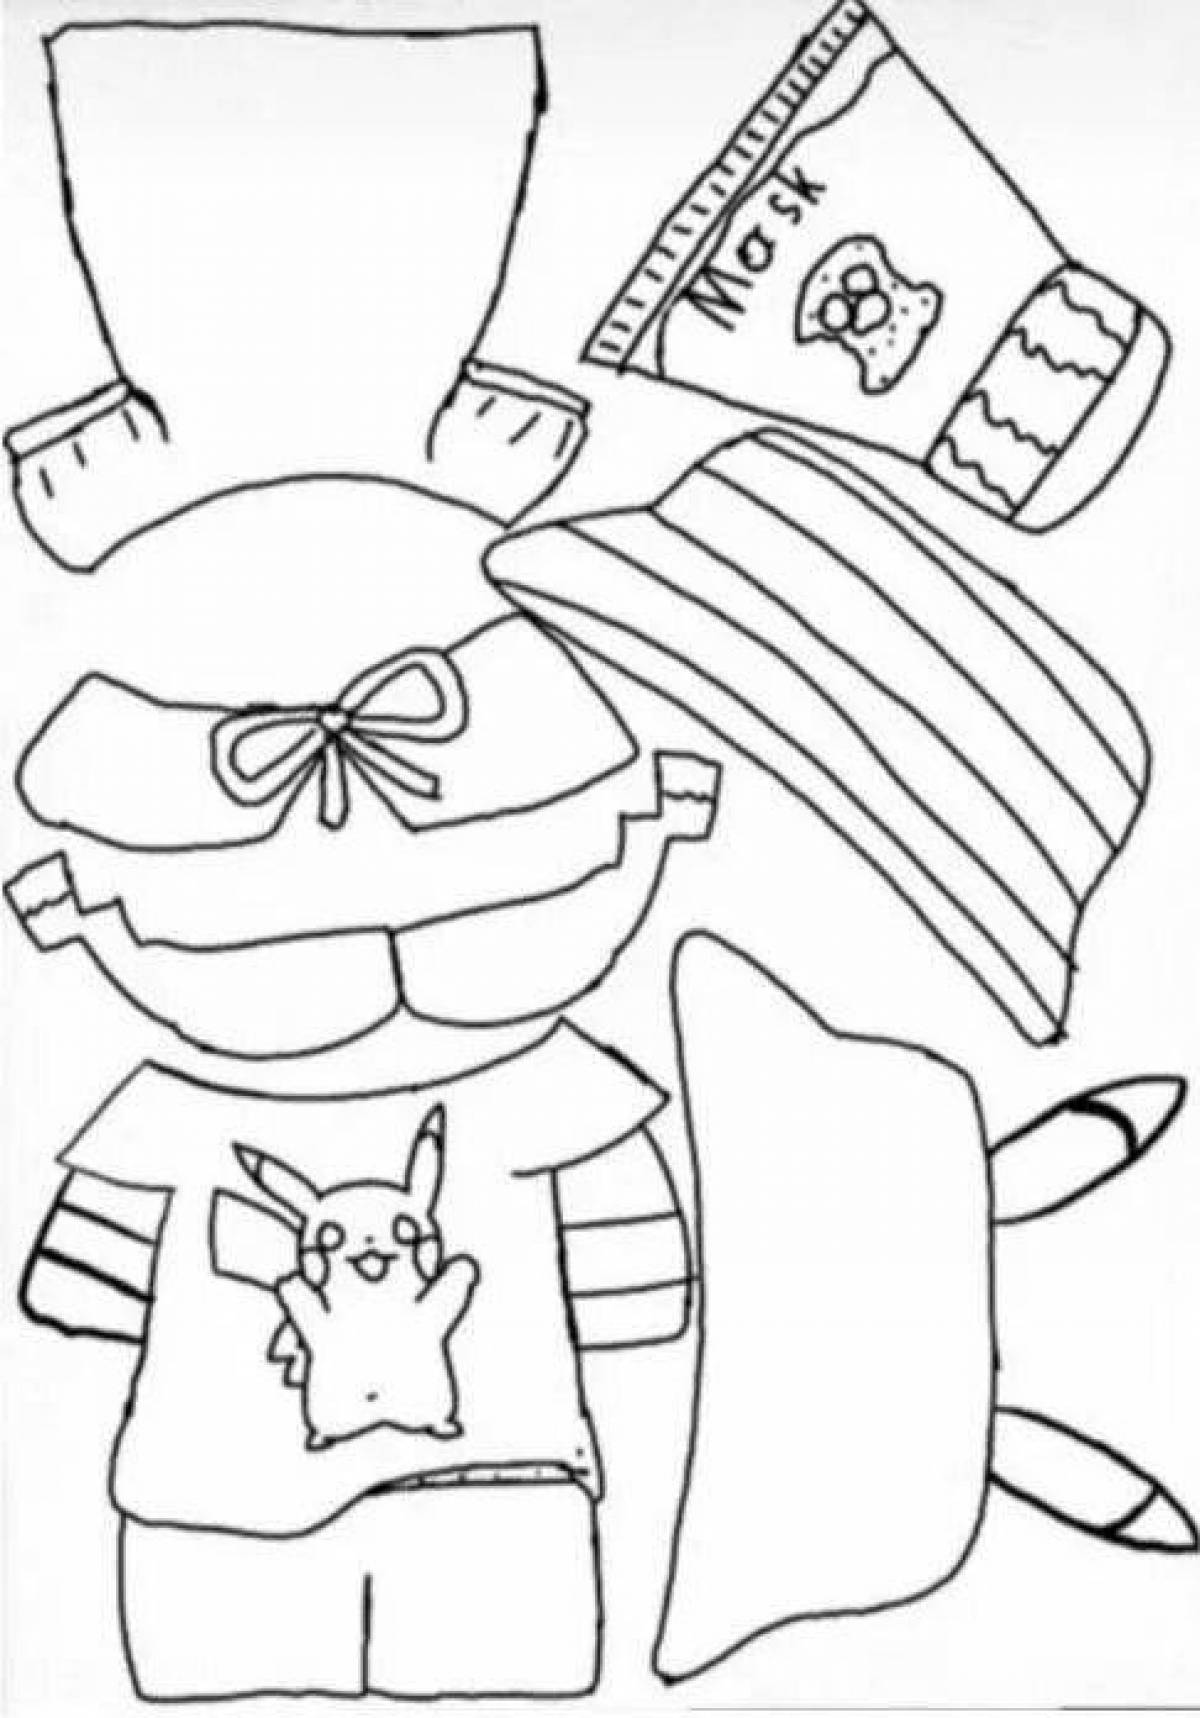 Adorable coloring book lalaphan duck with clothes